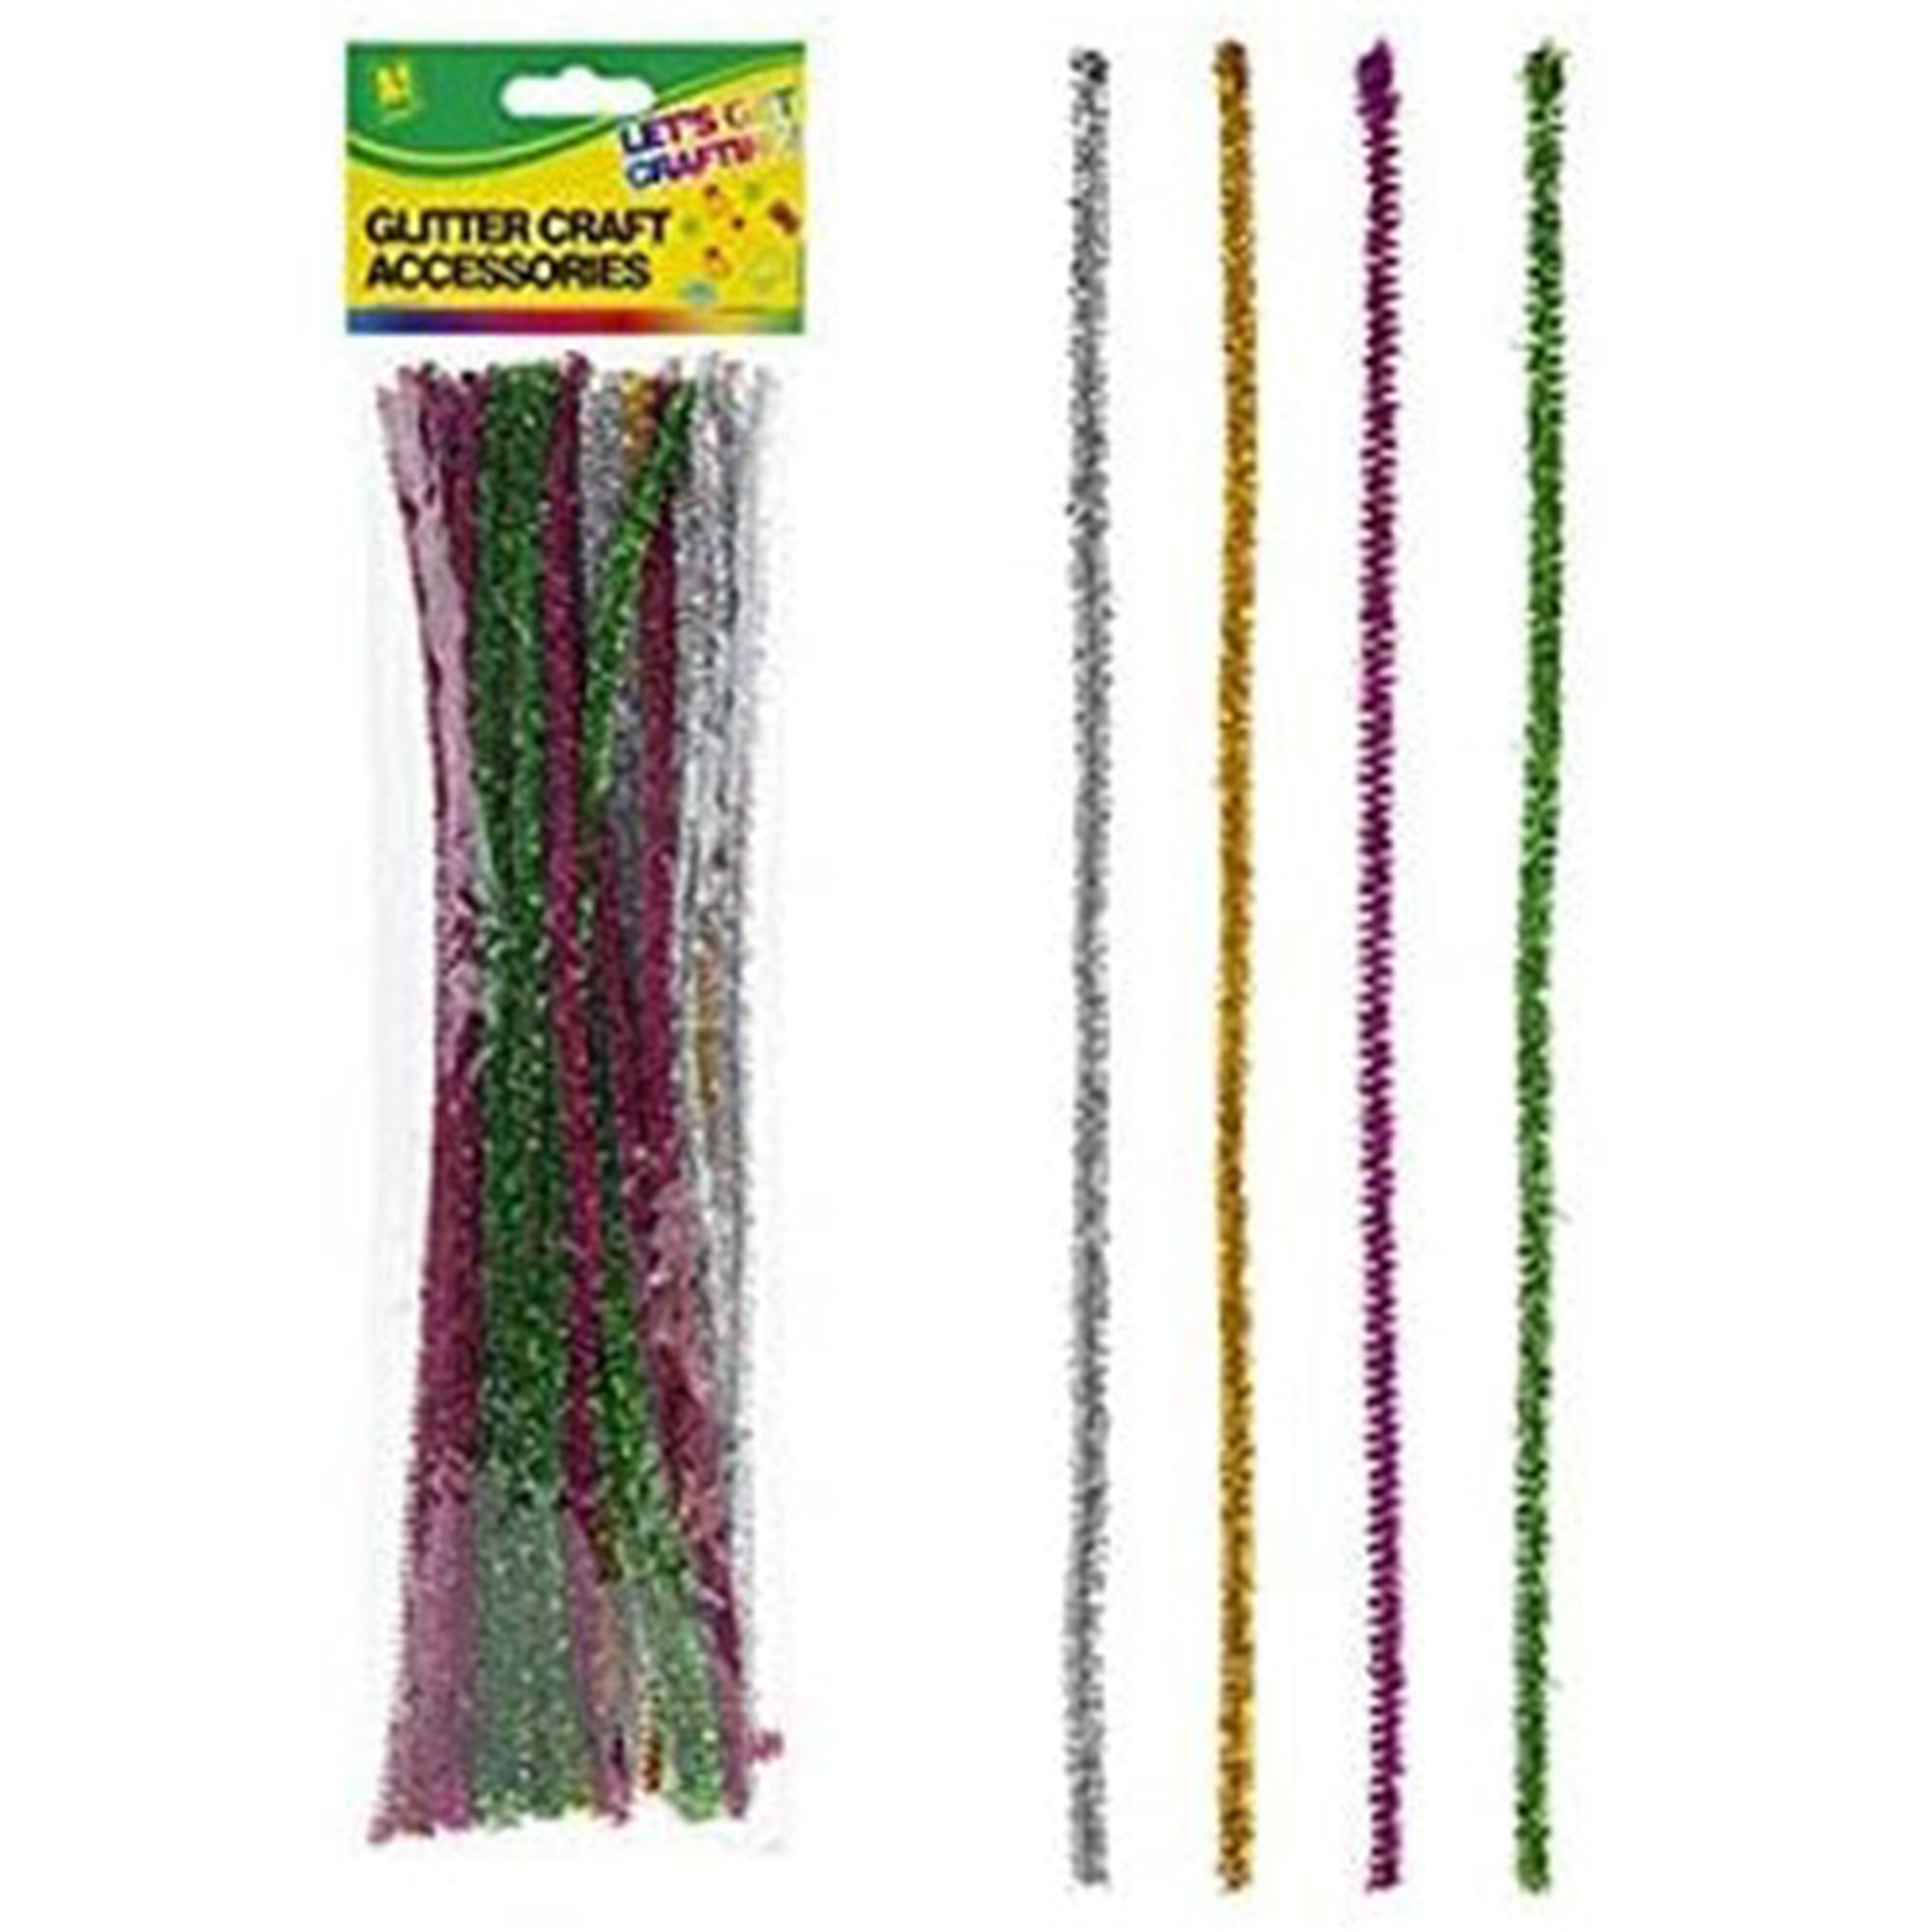 100 Pcs Glitter Pom Poms Twisted Stems Pipe Tinsel Pipe Cleaners